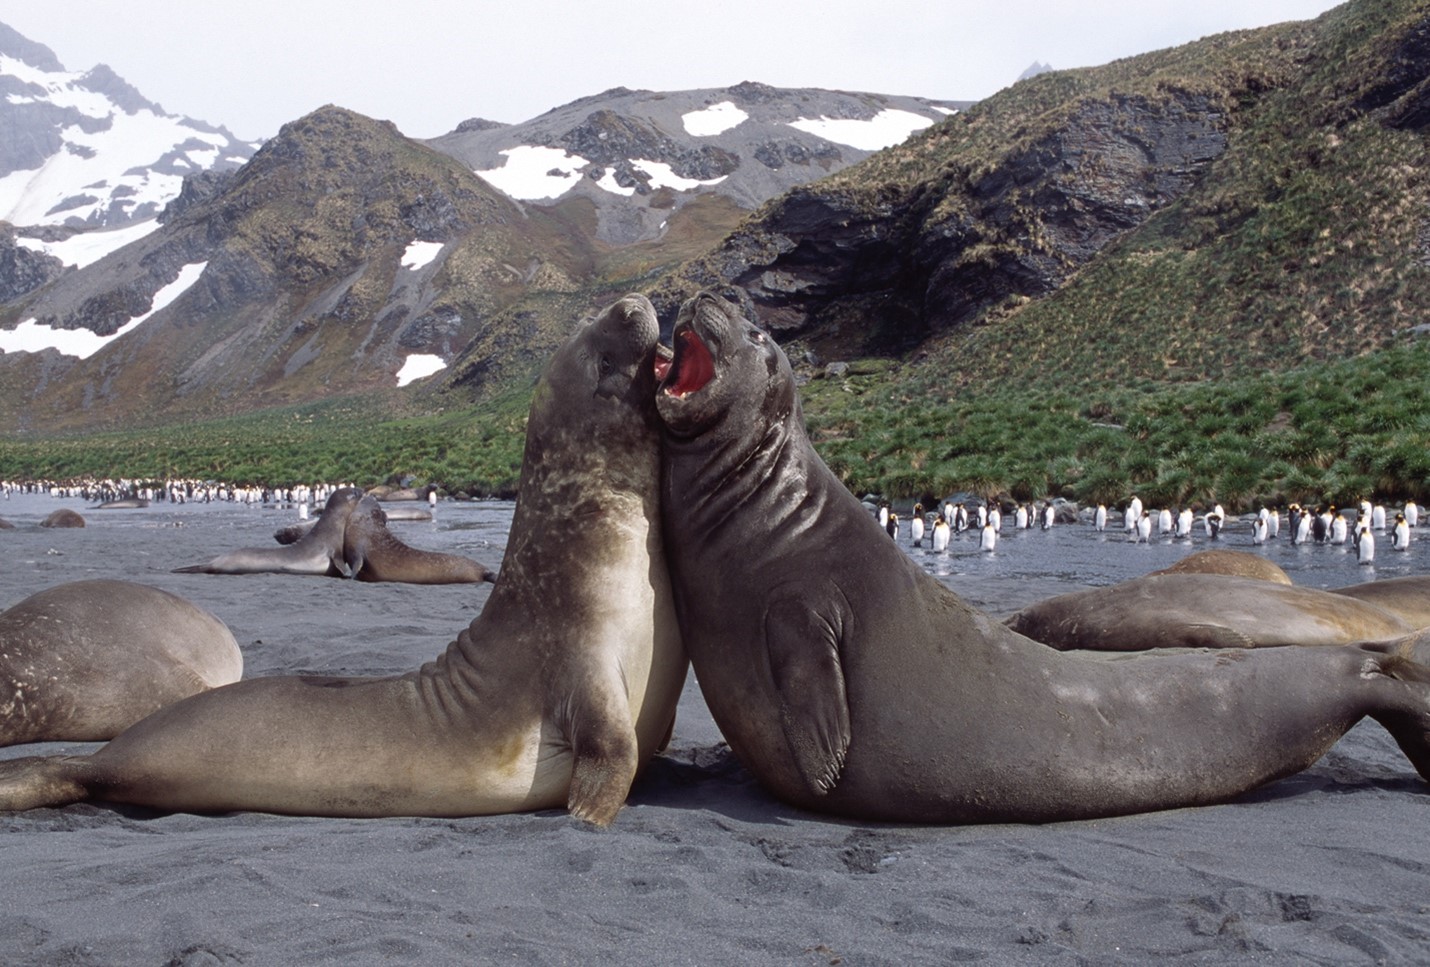 Juvenile Southern Elephant Seals vie for dominance in the colony.